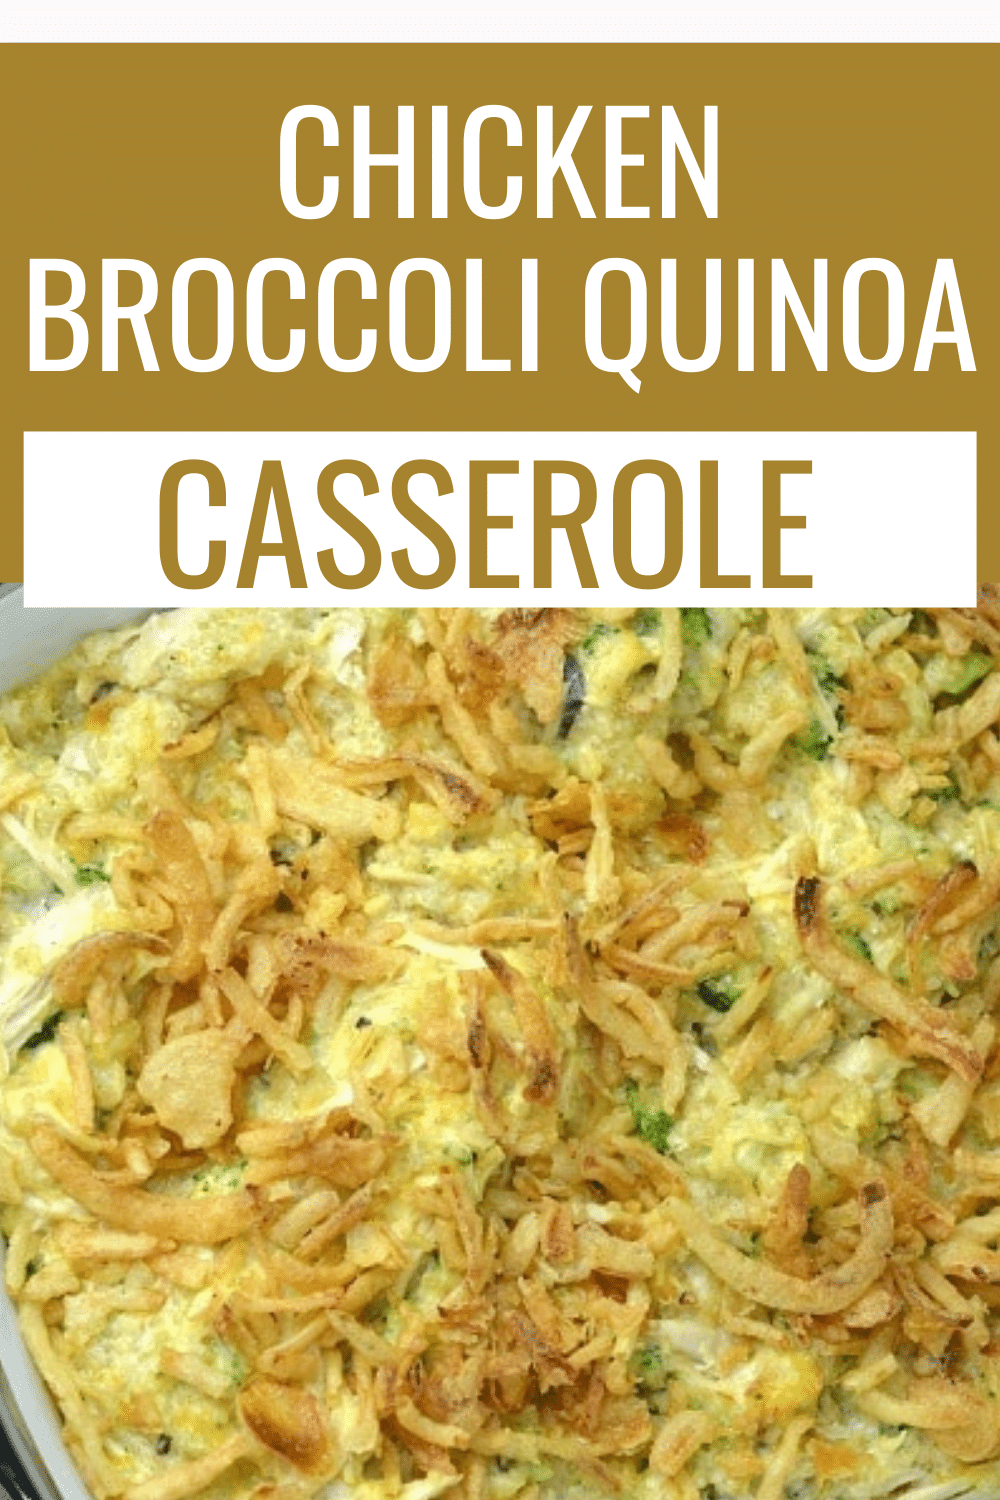 This Chicken Broccoli Quinoa Casserole is not only healthy, it's a combination of two side dish favorites so it's sure to be a hit with your family! #casserole #sidedish #broccoli #quinoa #chicken via @wondermomwannab